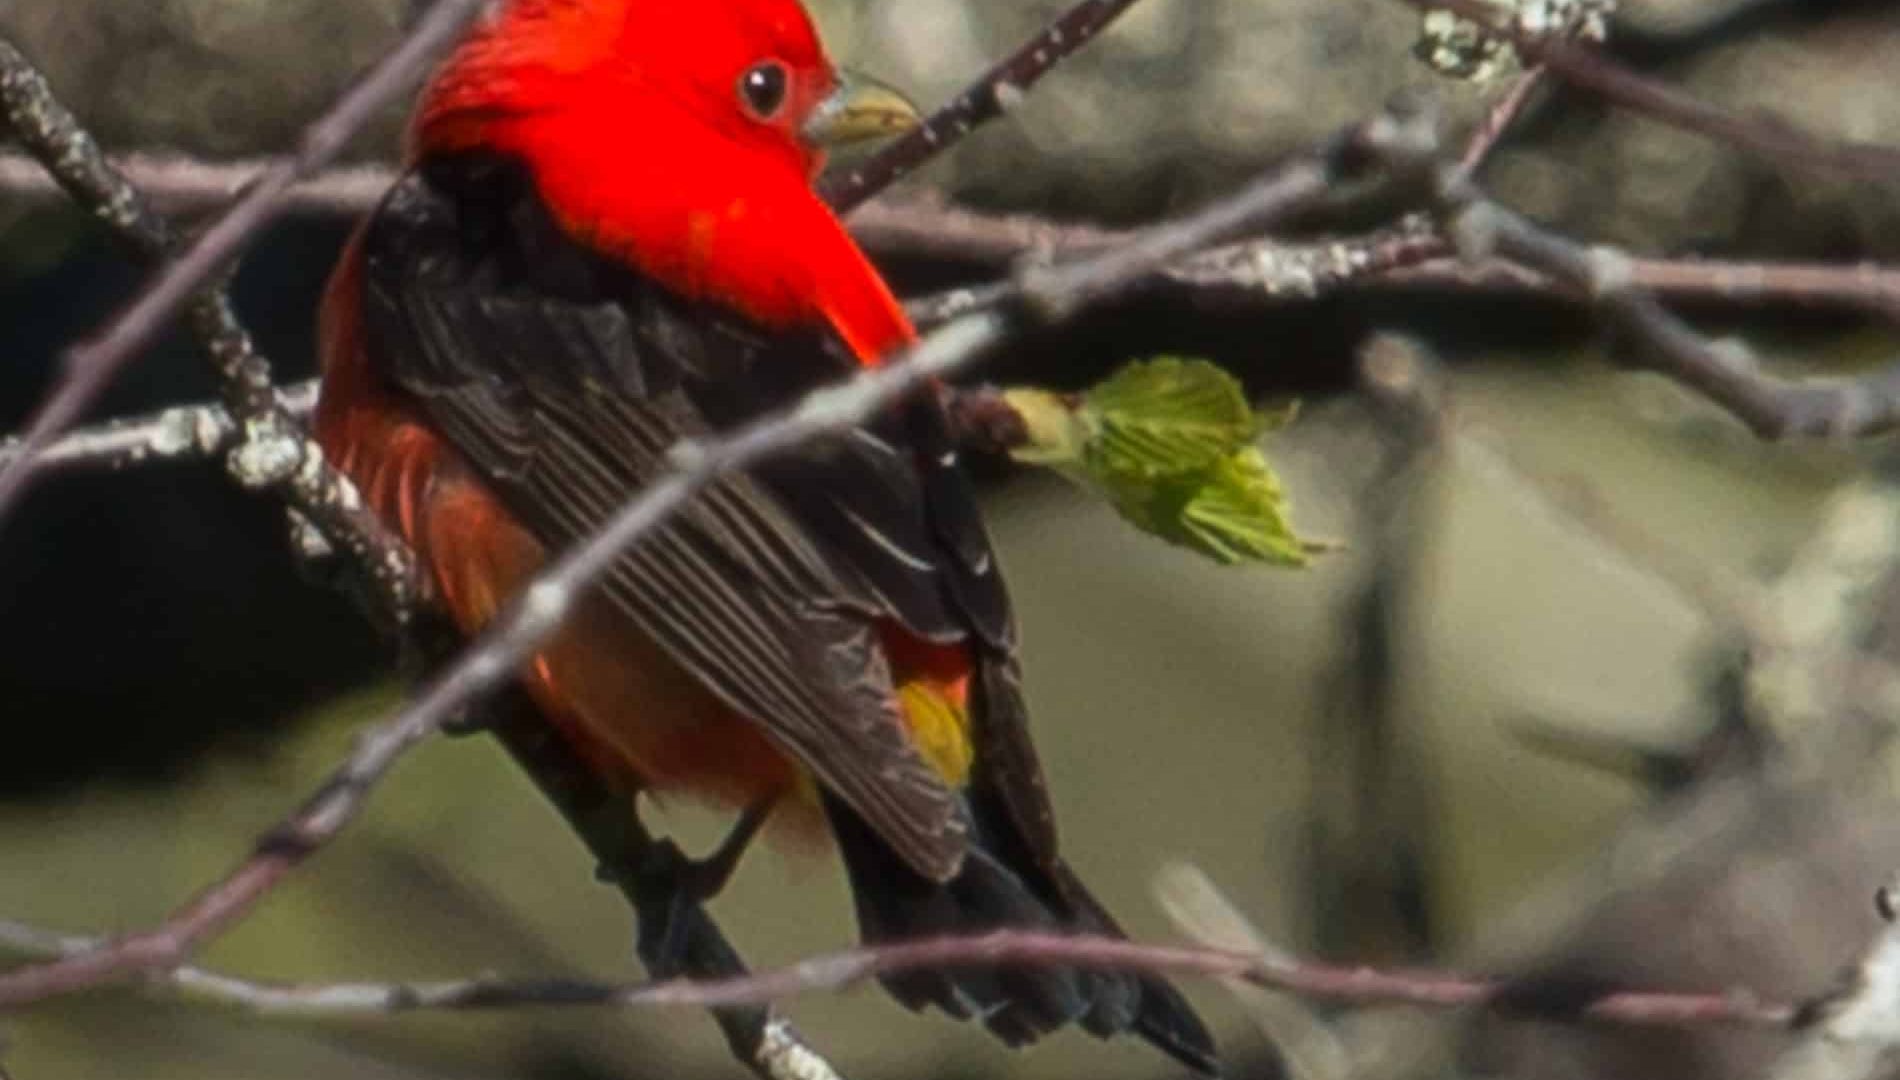 Bright red headed bird with black wings and yellow feathers on the body in the branches of a tree